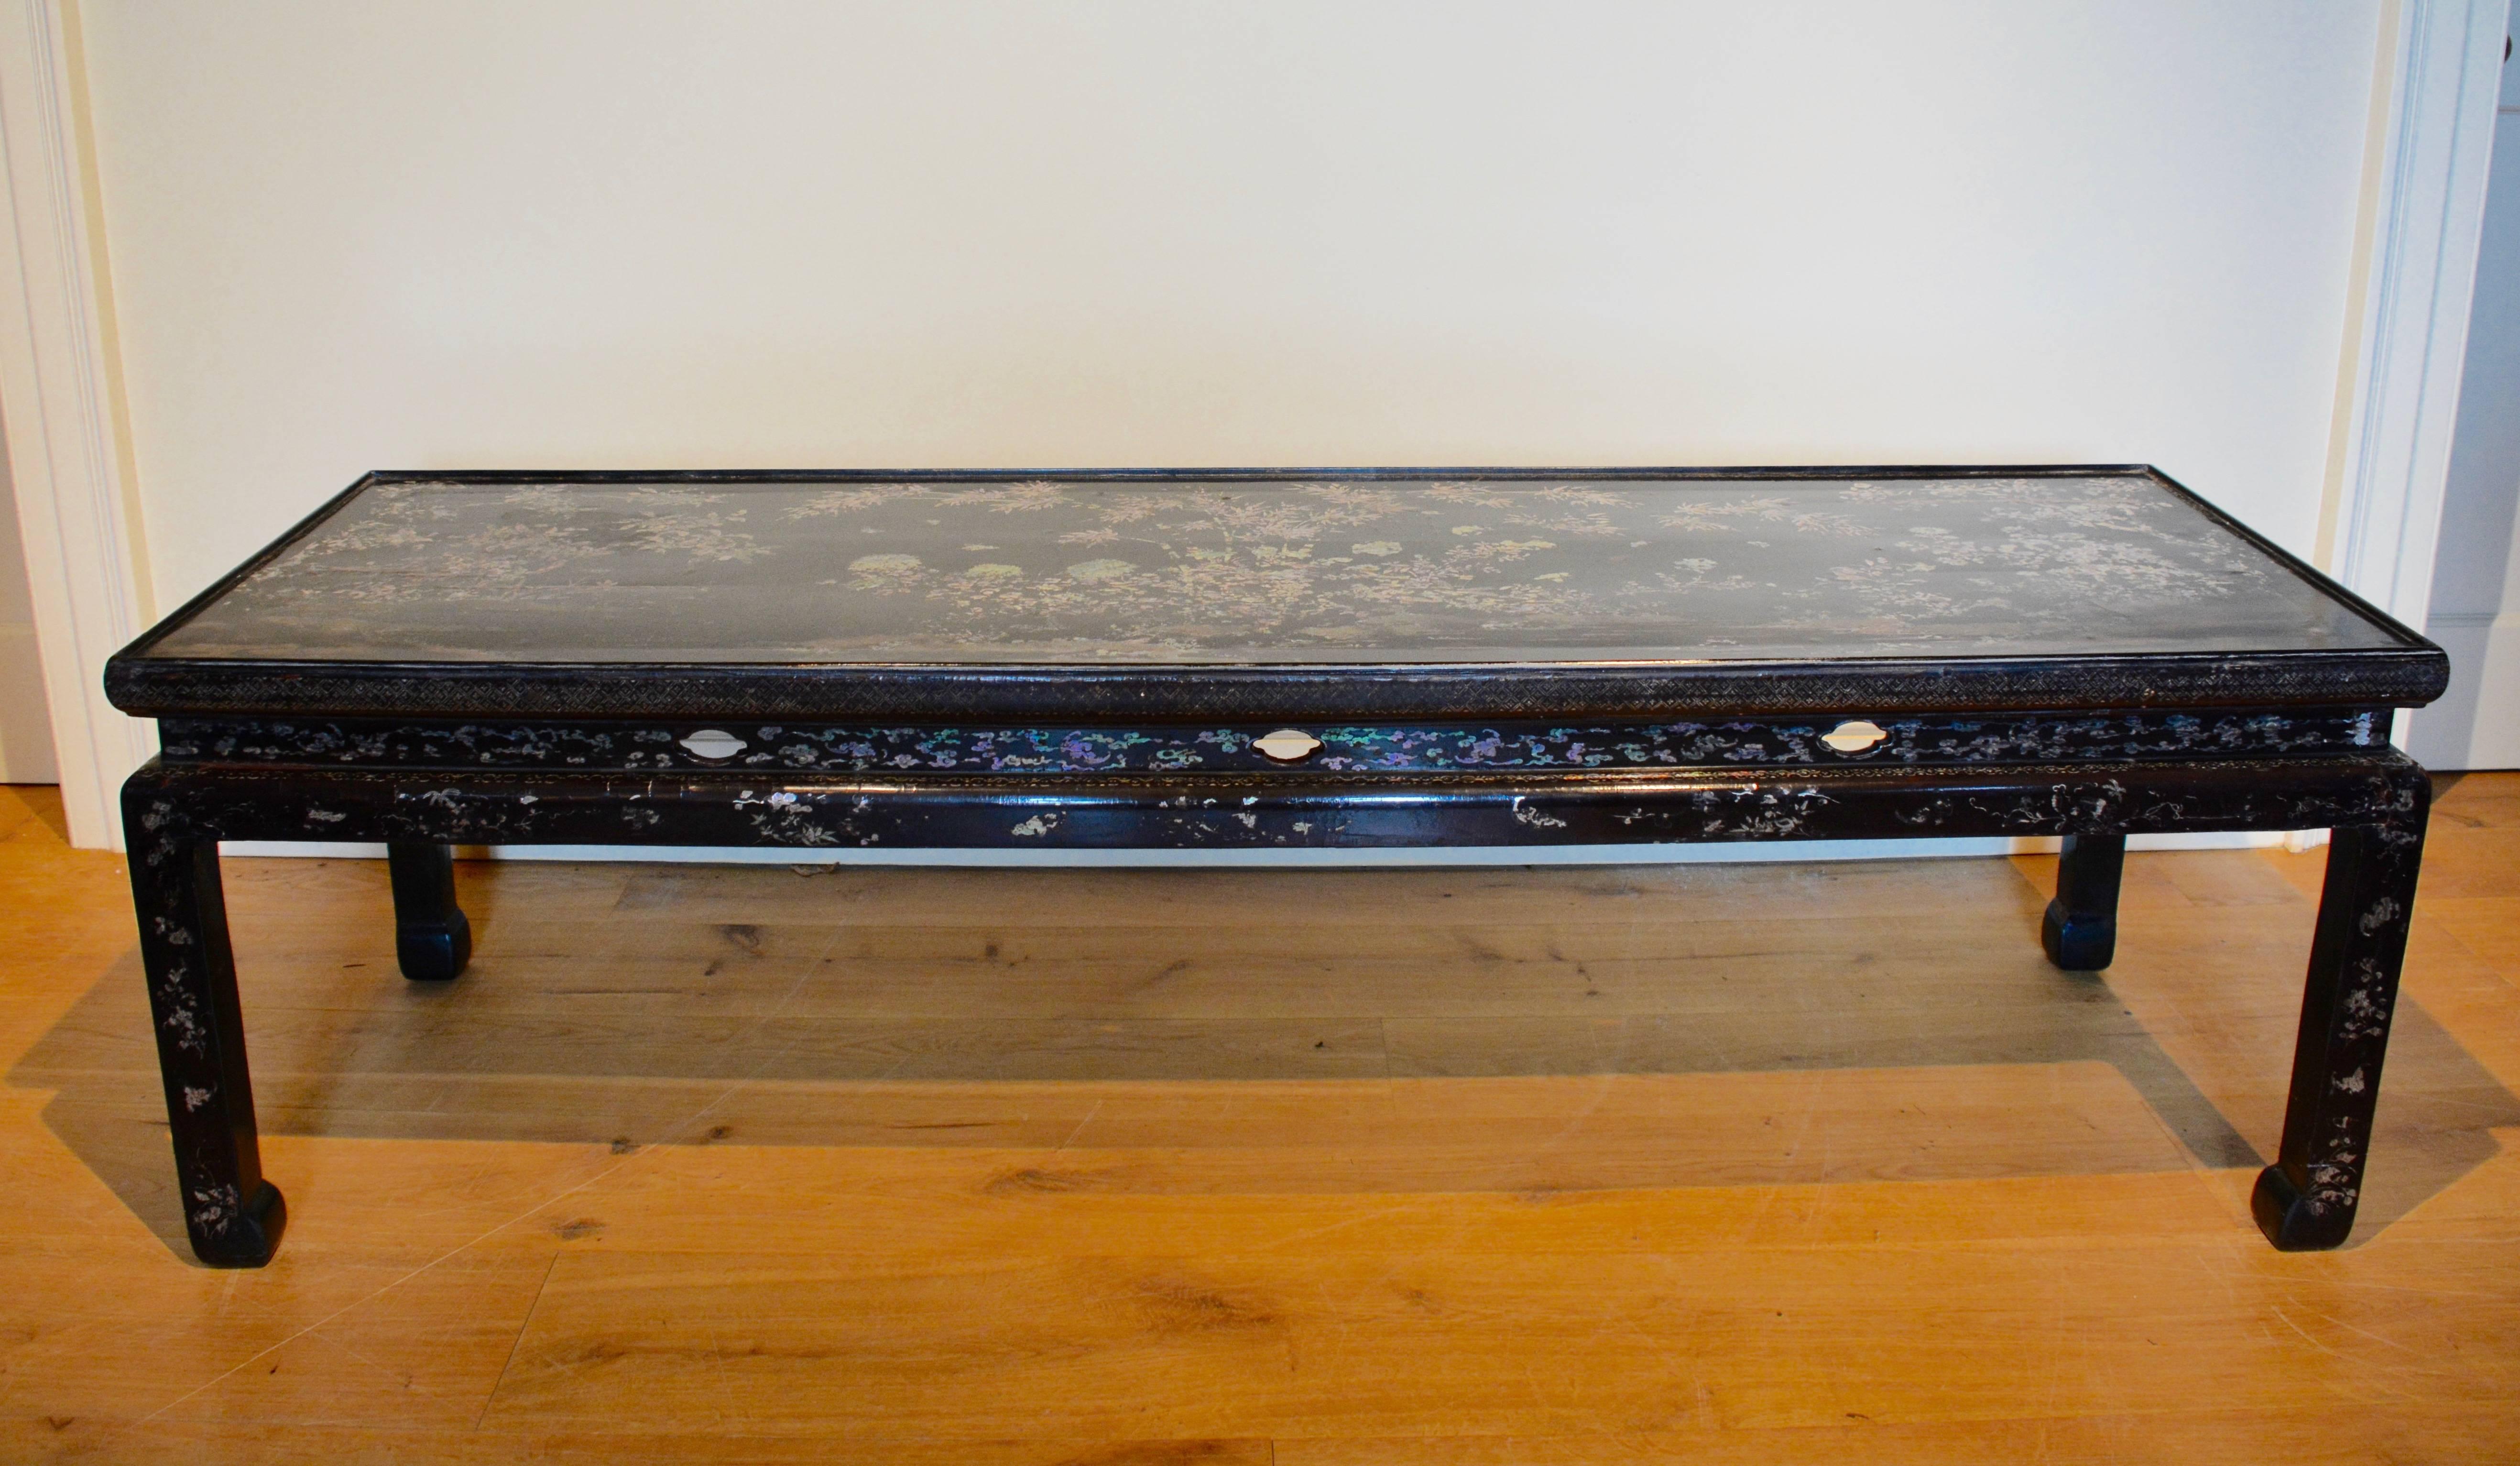 A mid-18th century Chinese lacquer centre table, with the legs now reduced in height to form a European coffee table.